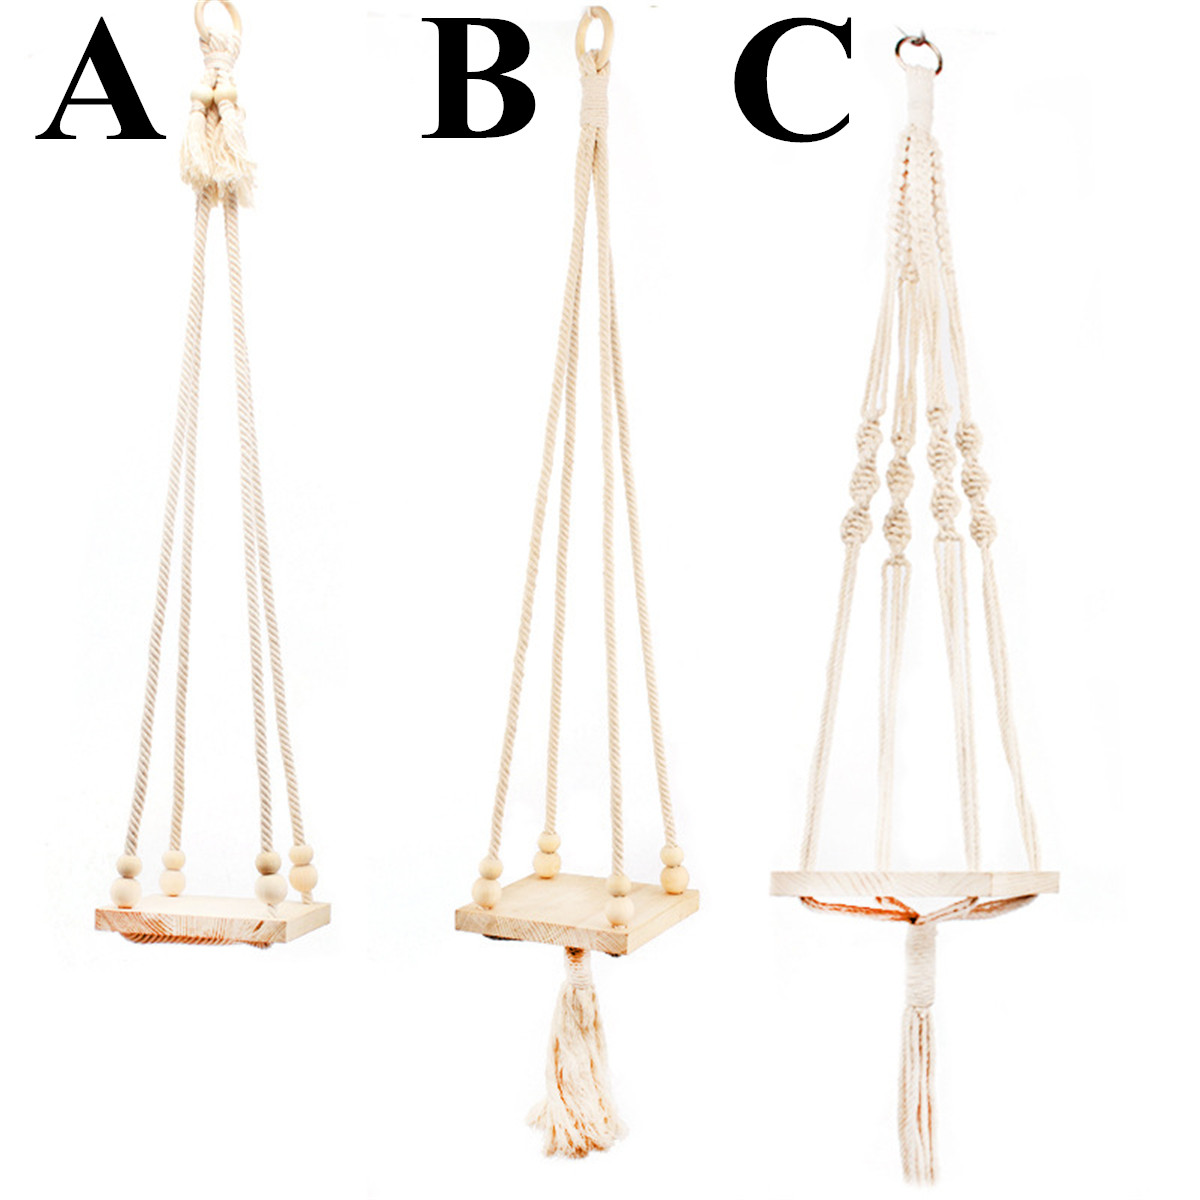 Braided-Rope-Hanging-Planter-Macrame-Plant-Flower-Pot-Holder-Indoor-Outdoor-Decorations-1475670-1